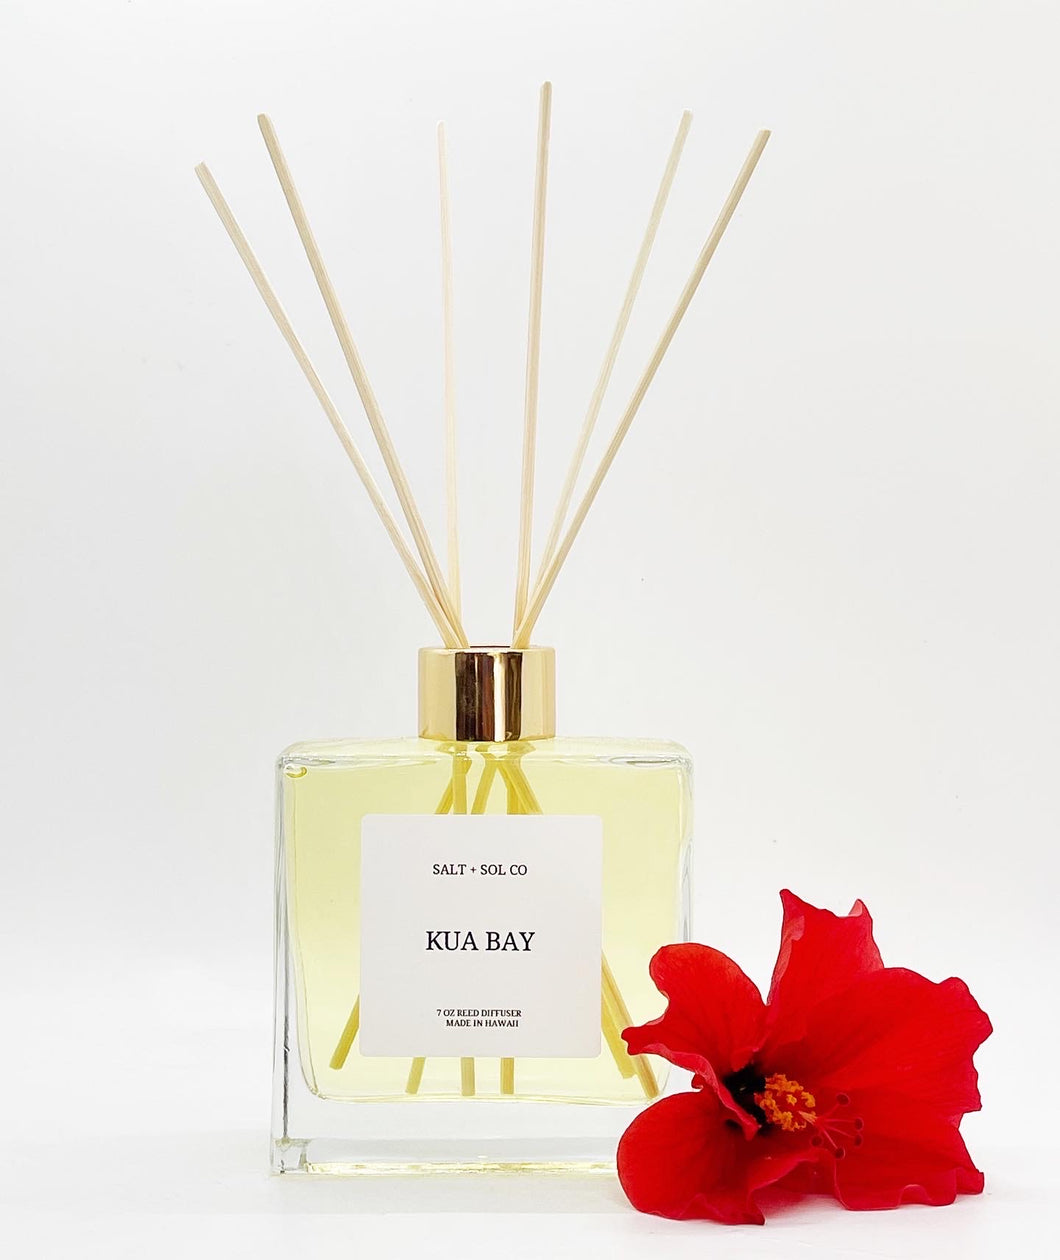 Kua Bay Reed diffuser for purchase at salt + SOL co made in hawaii